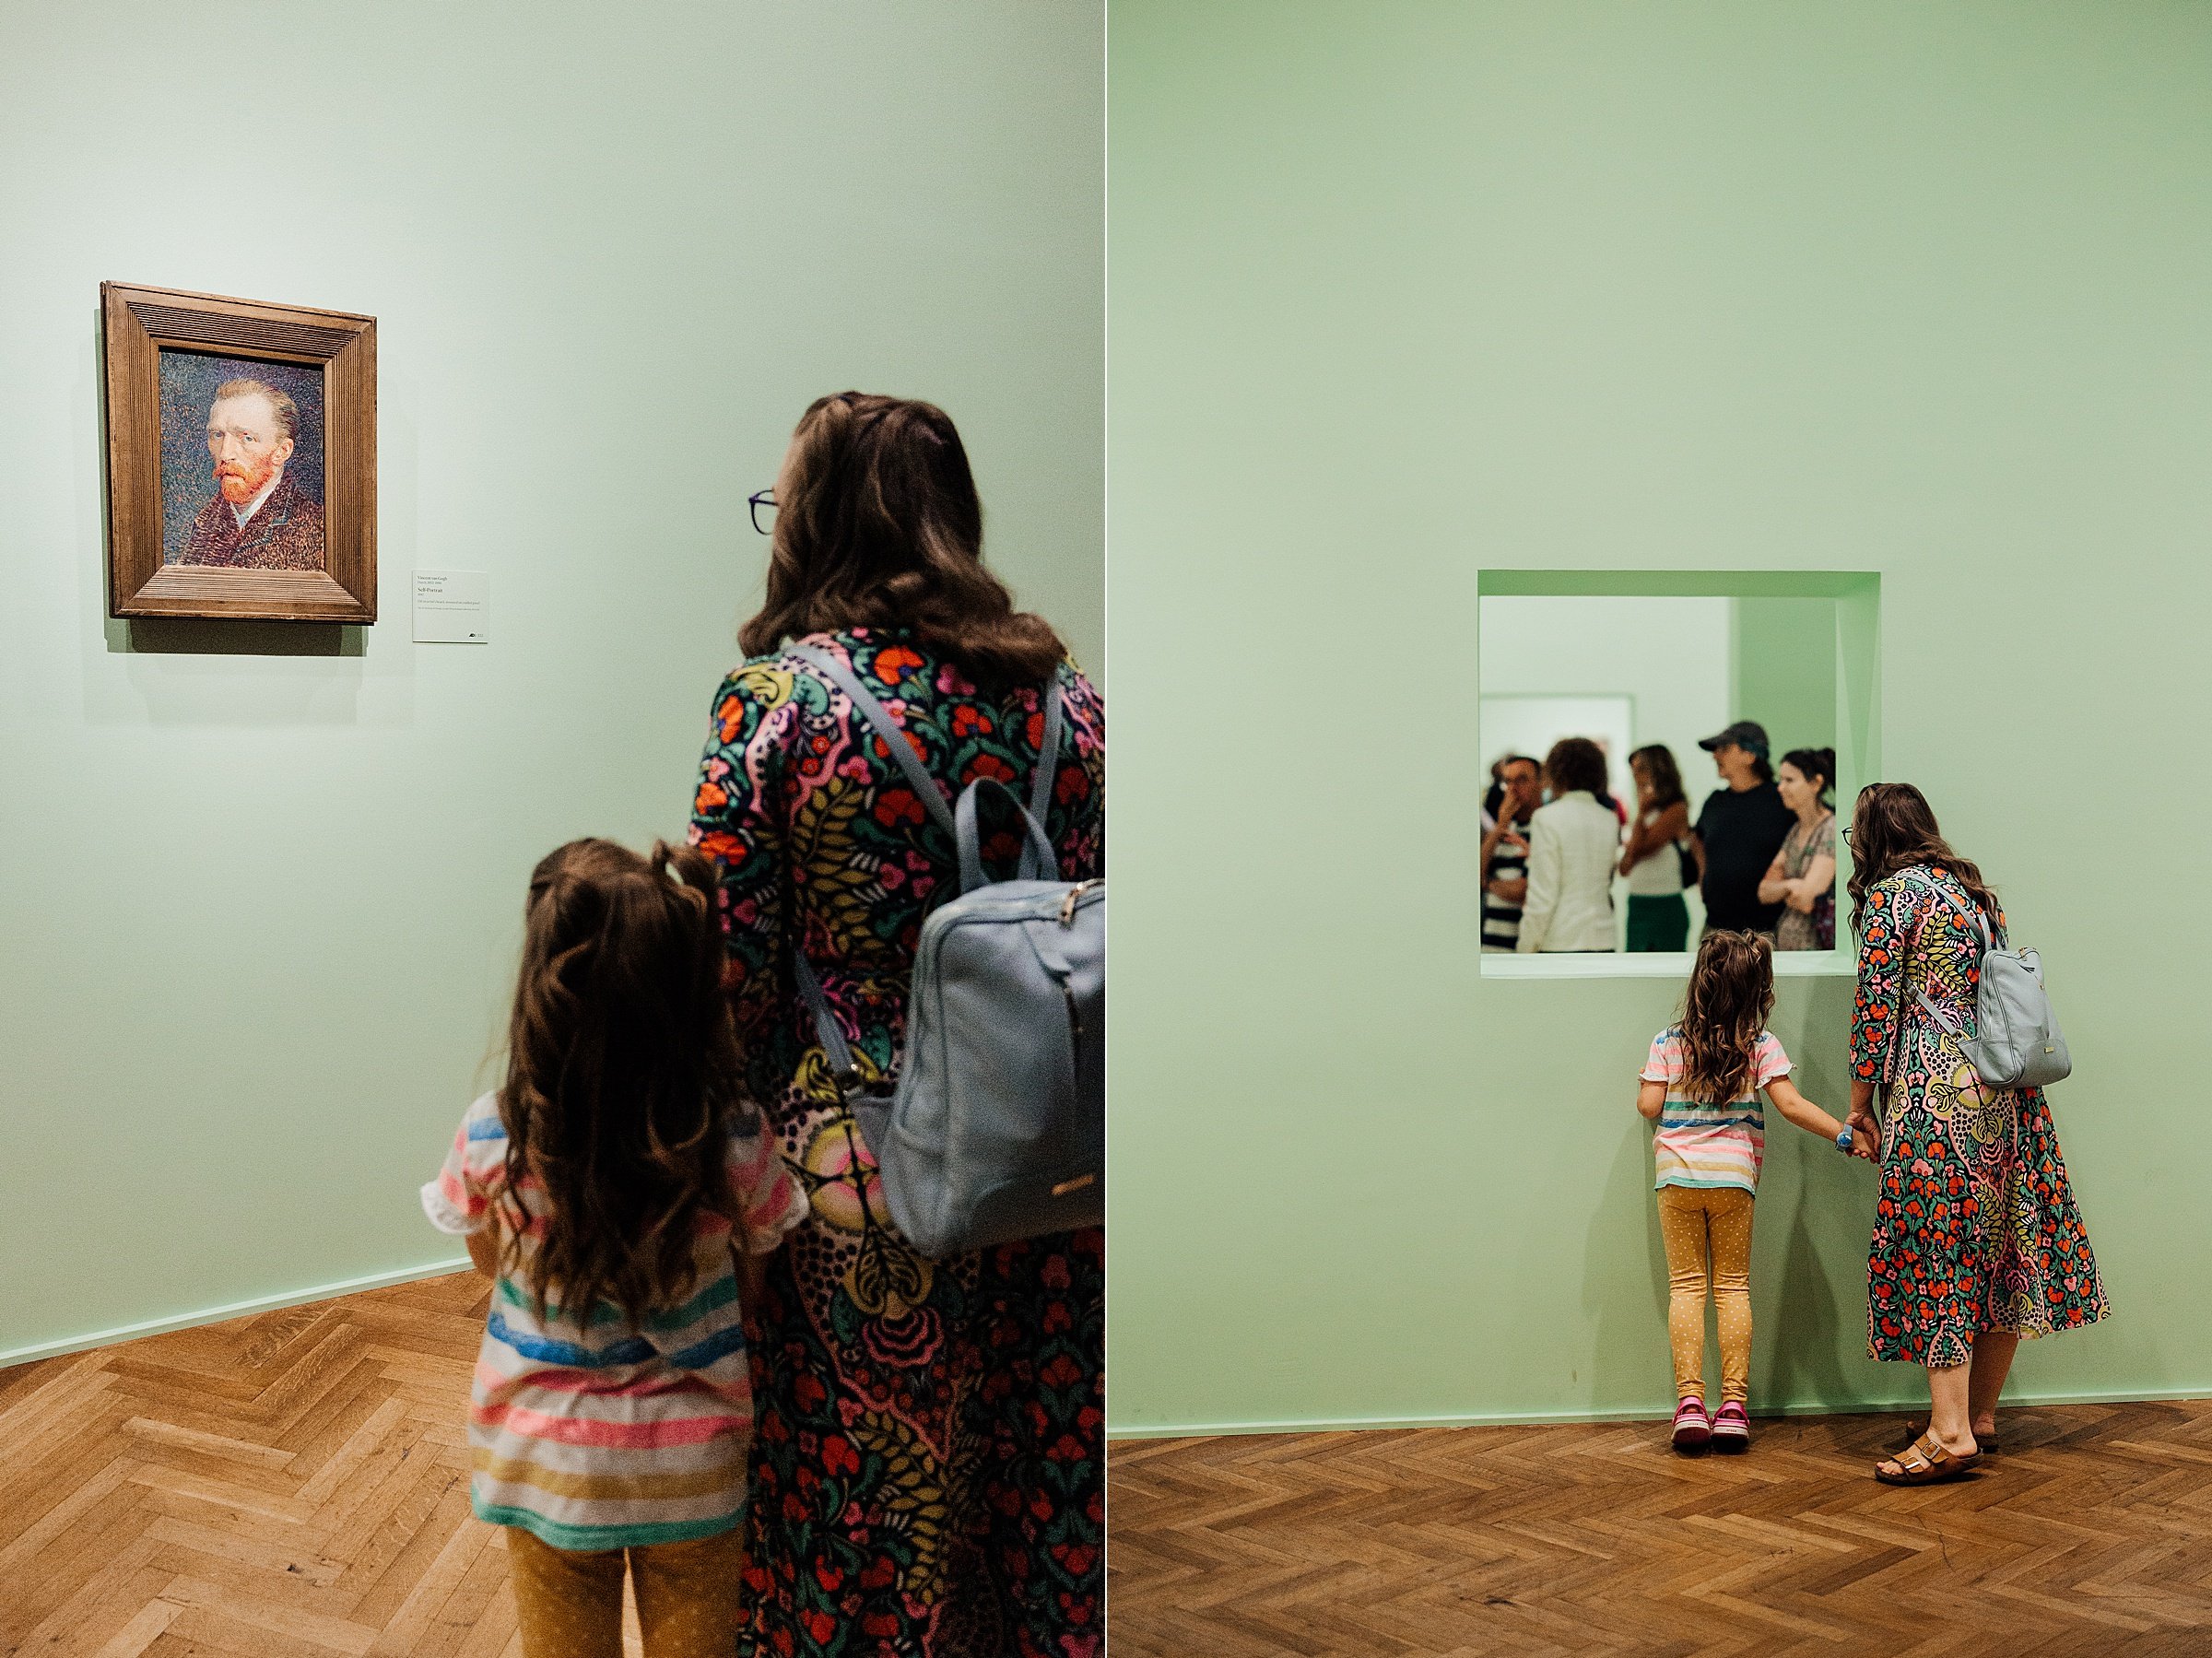  Now I was really interested as I really loved Van Gogh when I was younger but Grace was more interested in this square hole in the wall that looked into the other gallery room.   Then meltdown #1 happened. She didn’t like me holding her hand but it 